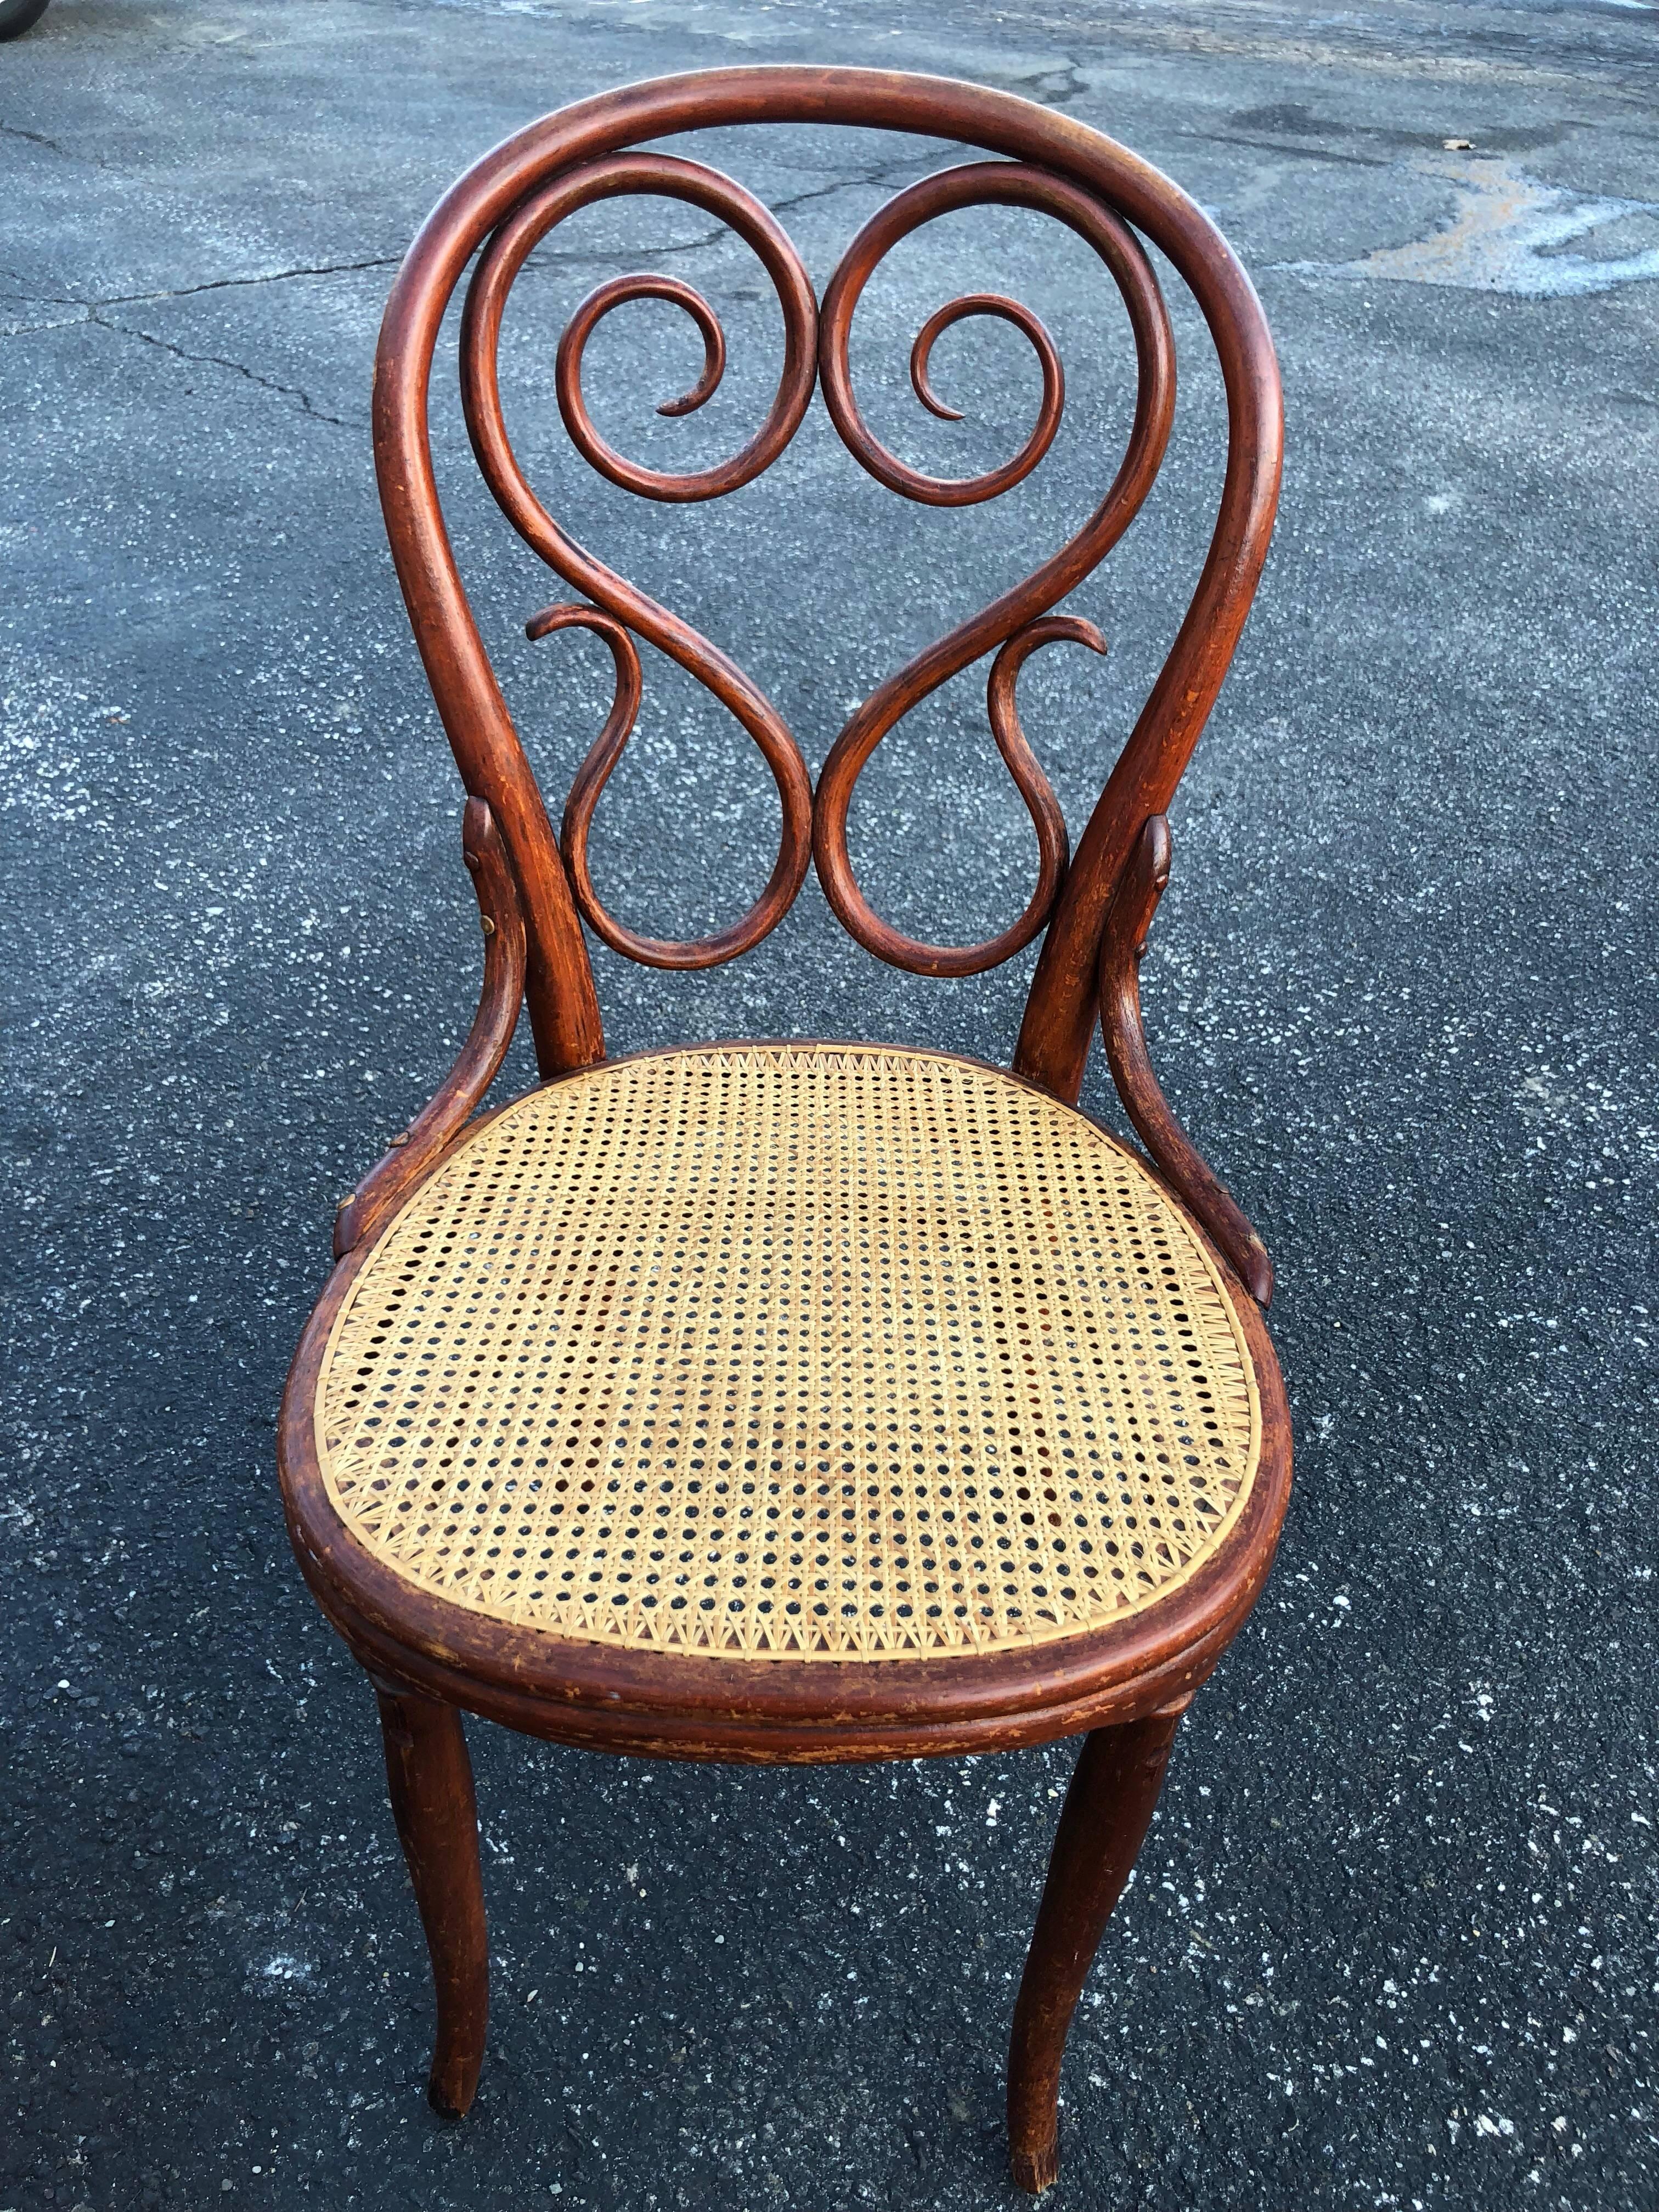 Vintage Thonet chair with caned seat and exquisite heart shaped scrolled back.
Seat depth is 17. Final markdown. Clearance price.